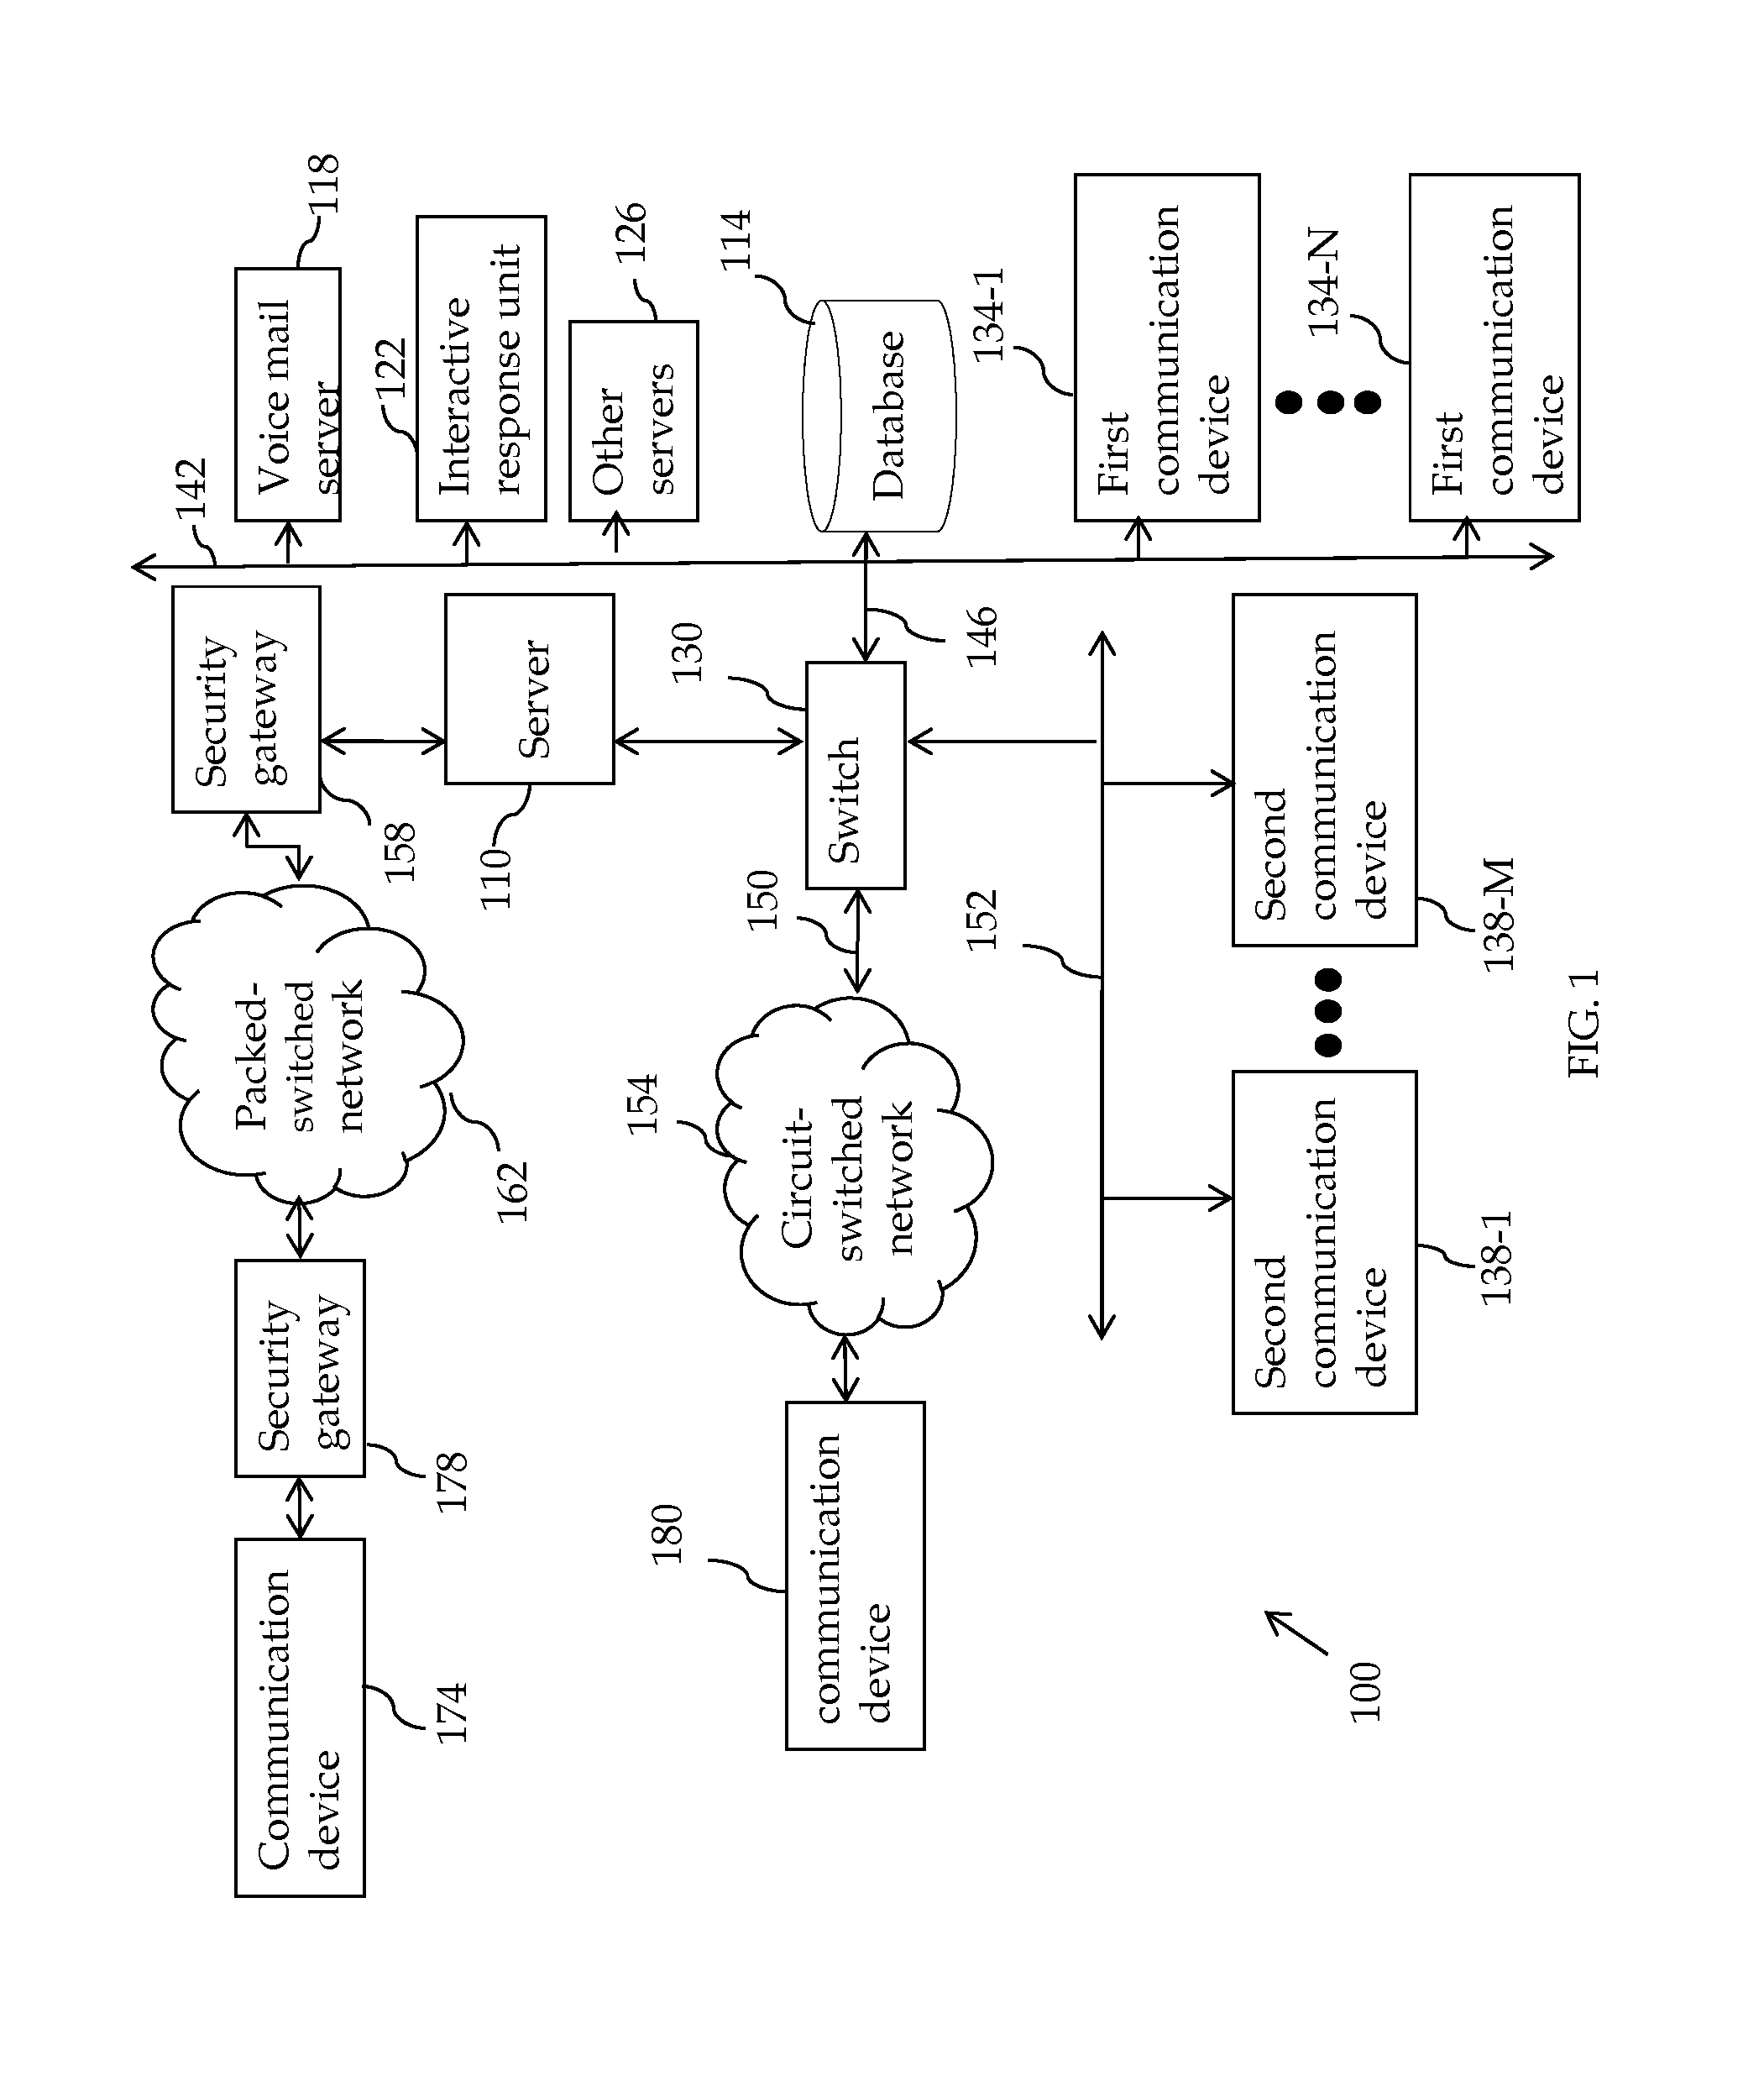 Method and system for optimizing performance within a contact center